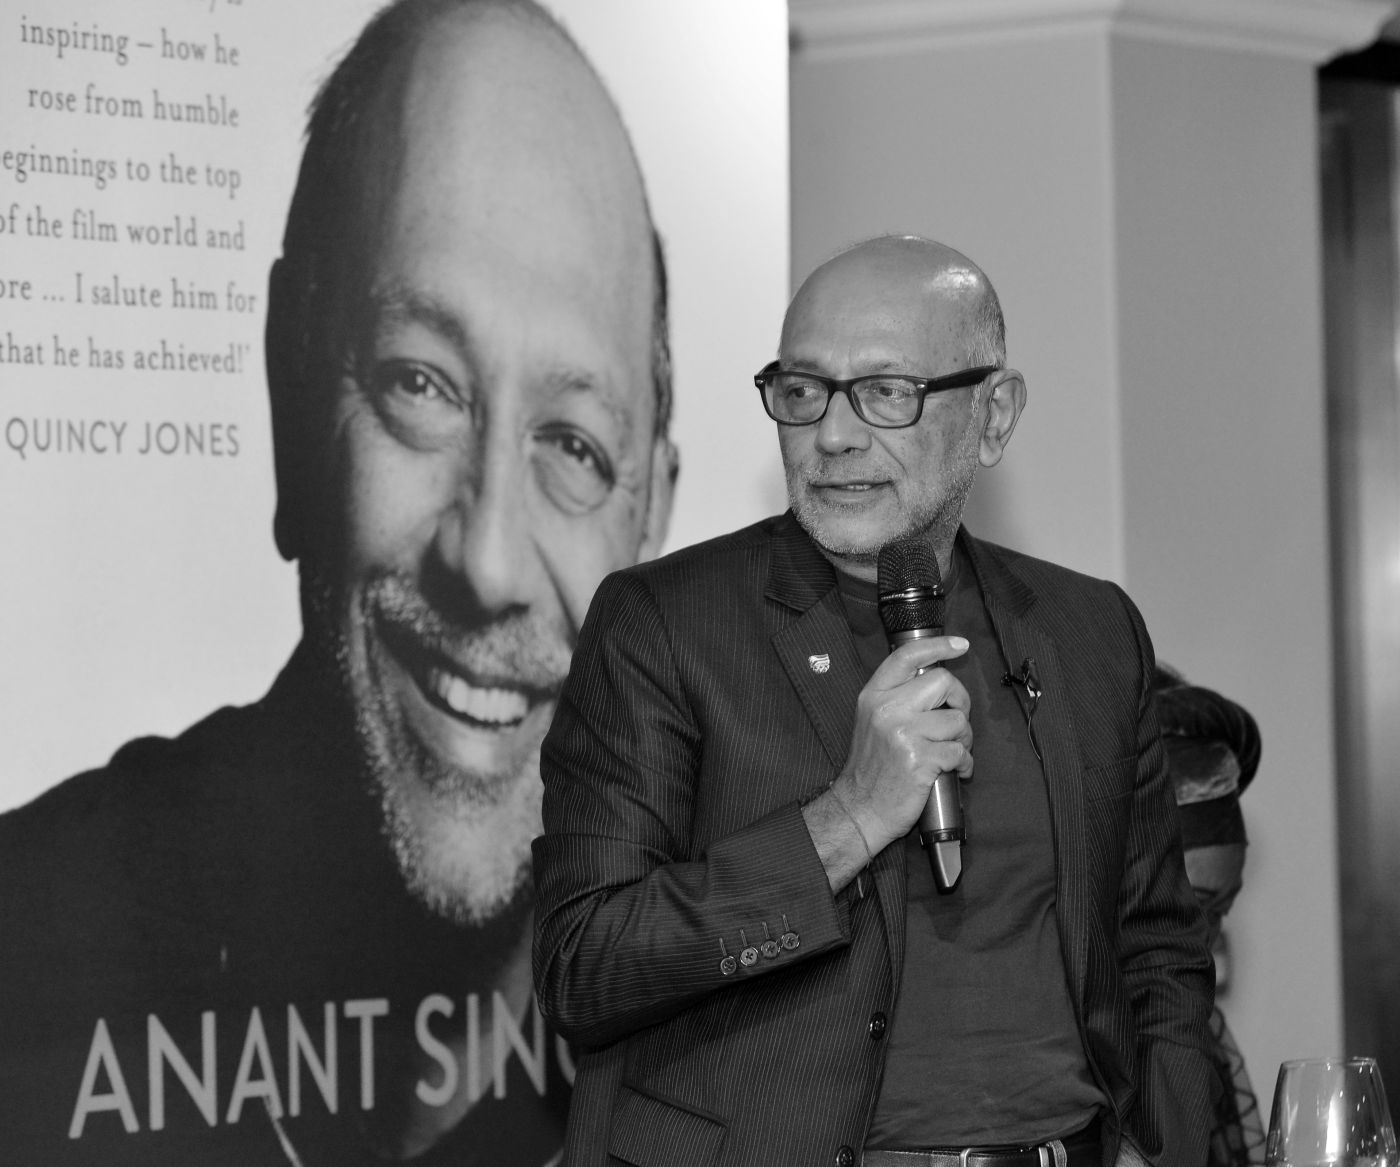 Anant Singh at the launch of his book, In Black and White